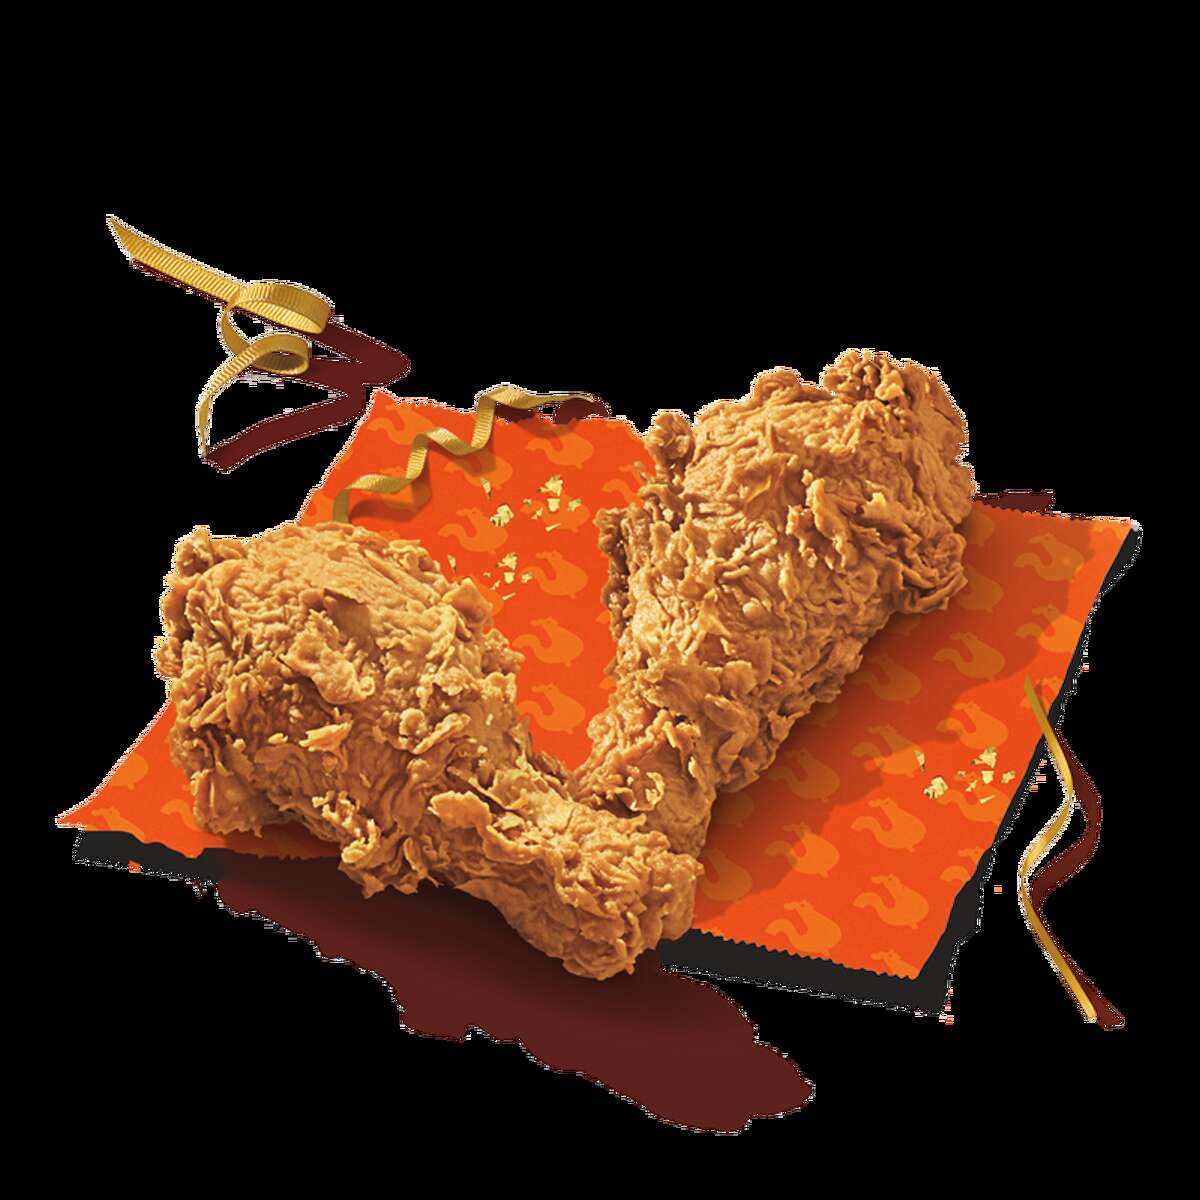 Popeyes 2-piece signature bone-in chicken is selling for just $0.59 as part of its 50th anniversary celebration.